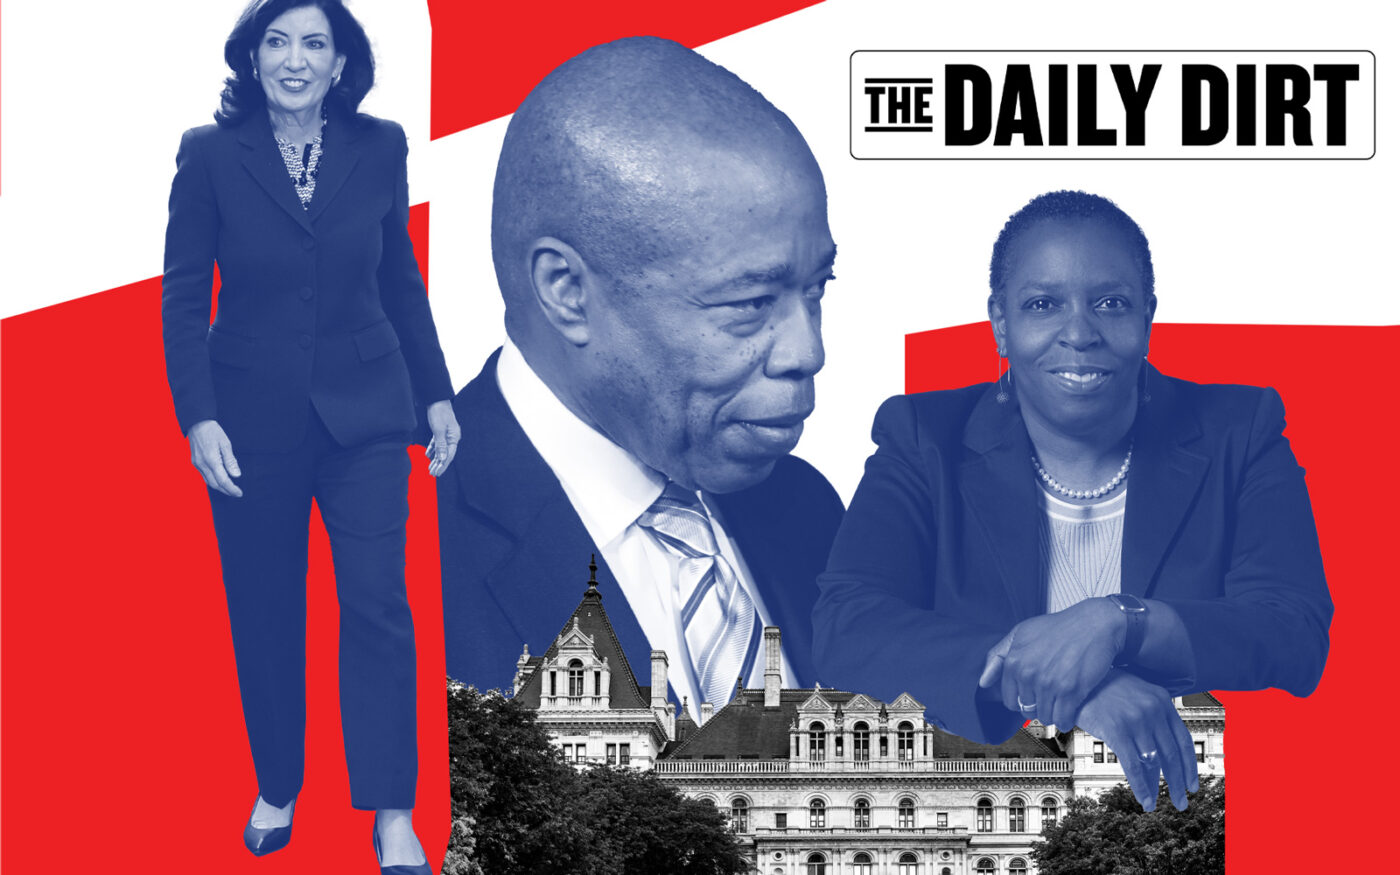 New York Court to Hear Property Tax Challenge: The Daily Dirt